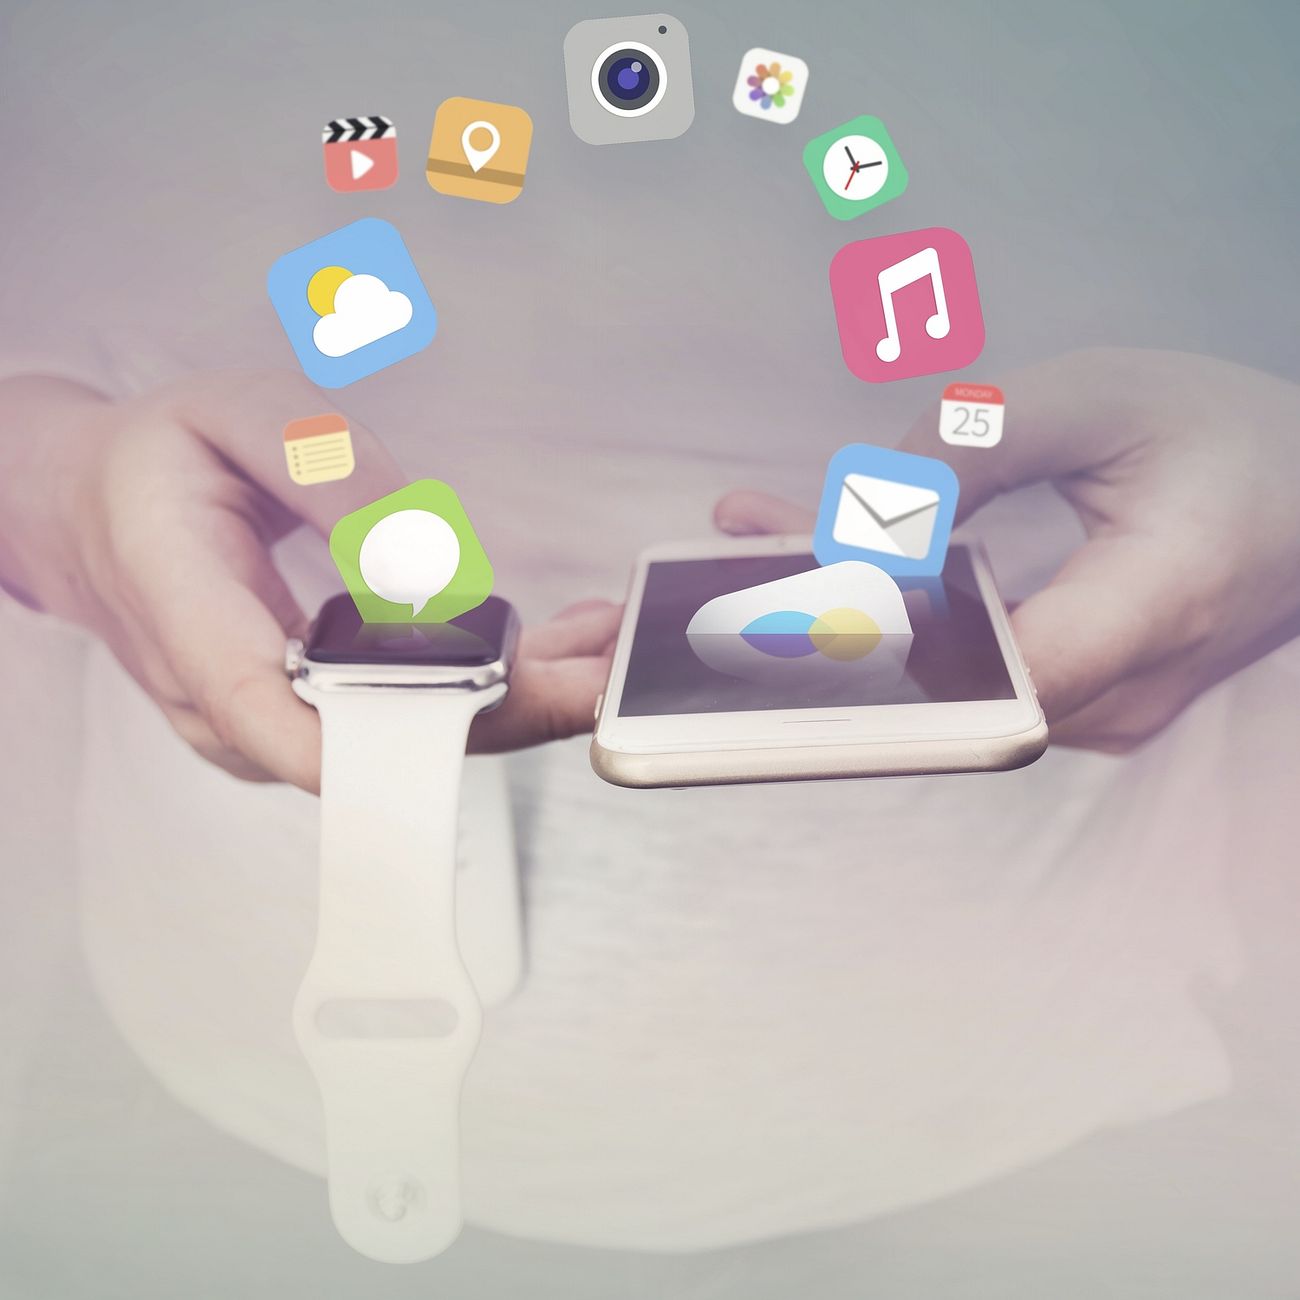 Smartwatch digital device and technology